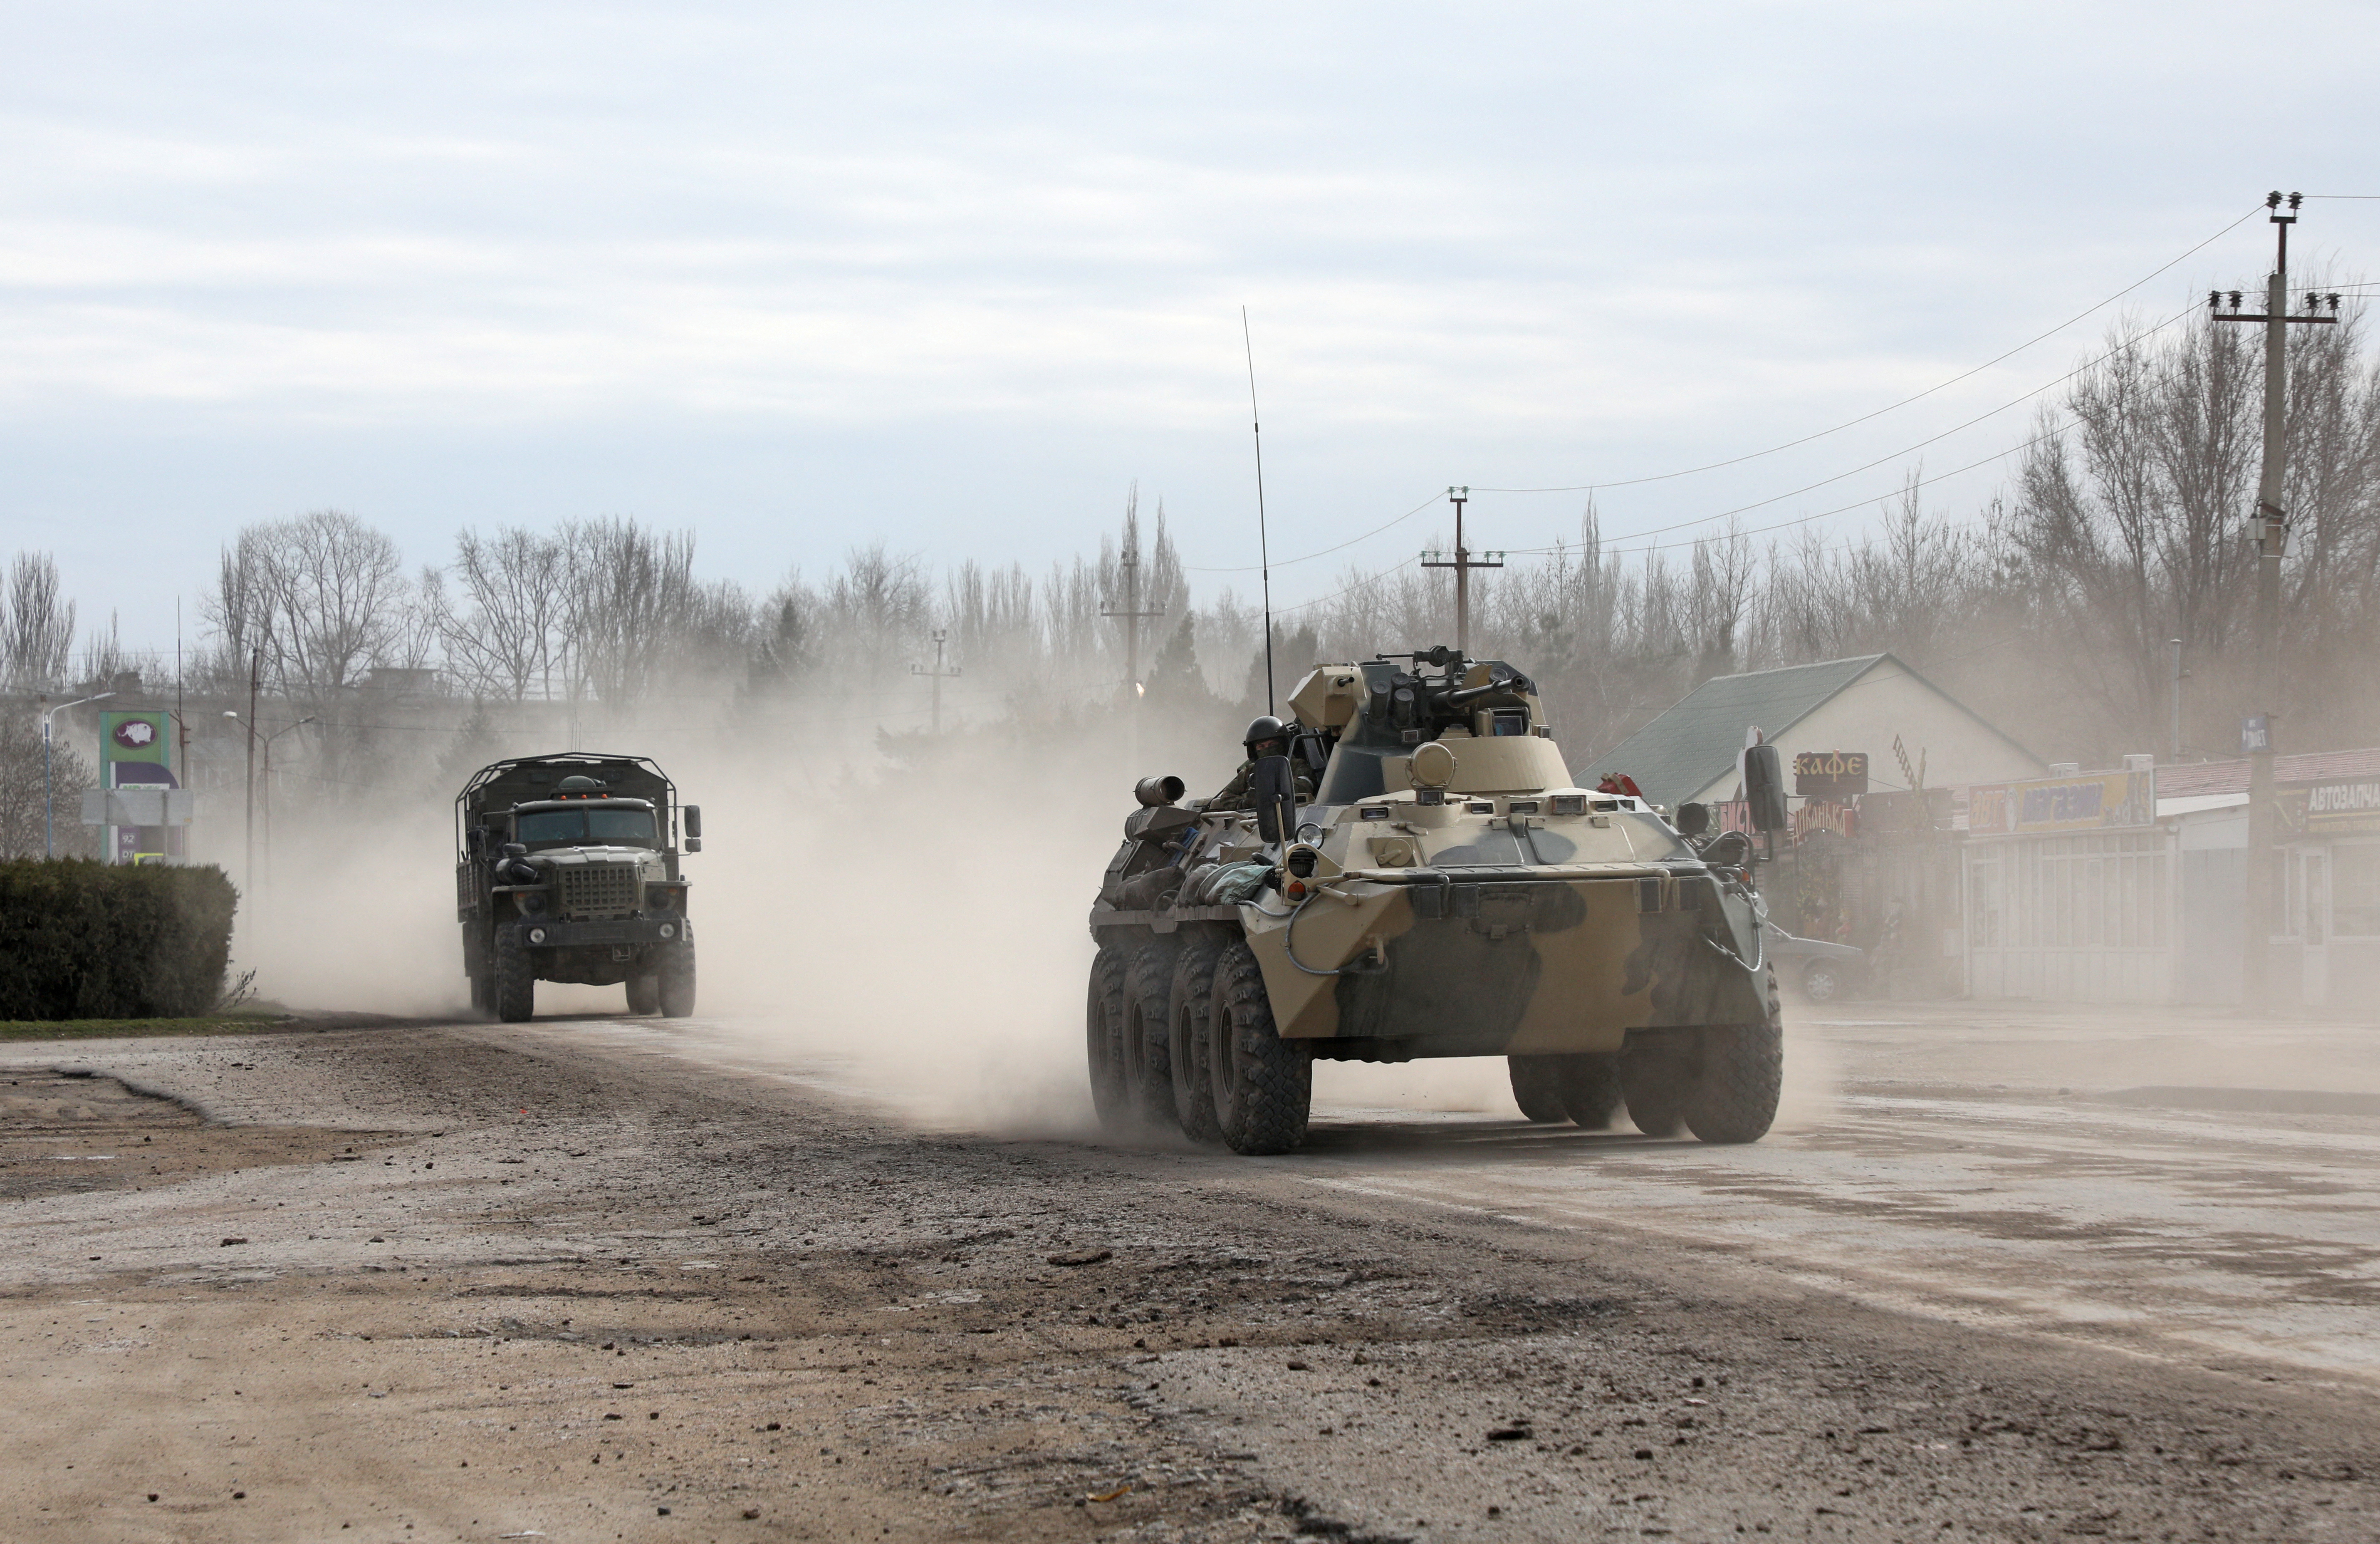 Russian Army military vehicles drive along a street in Armyansk